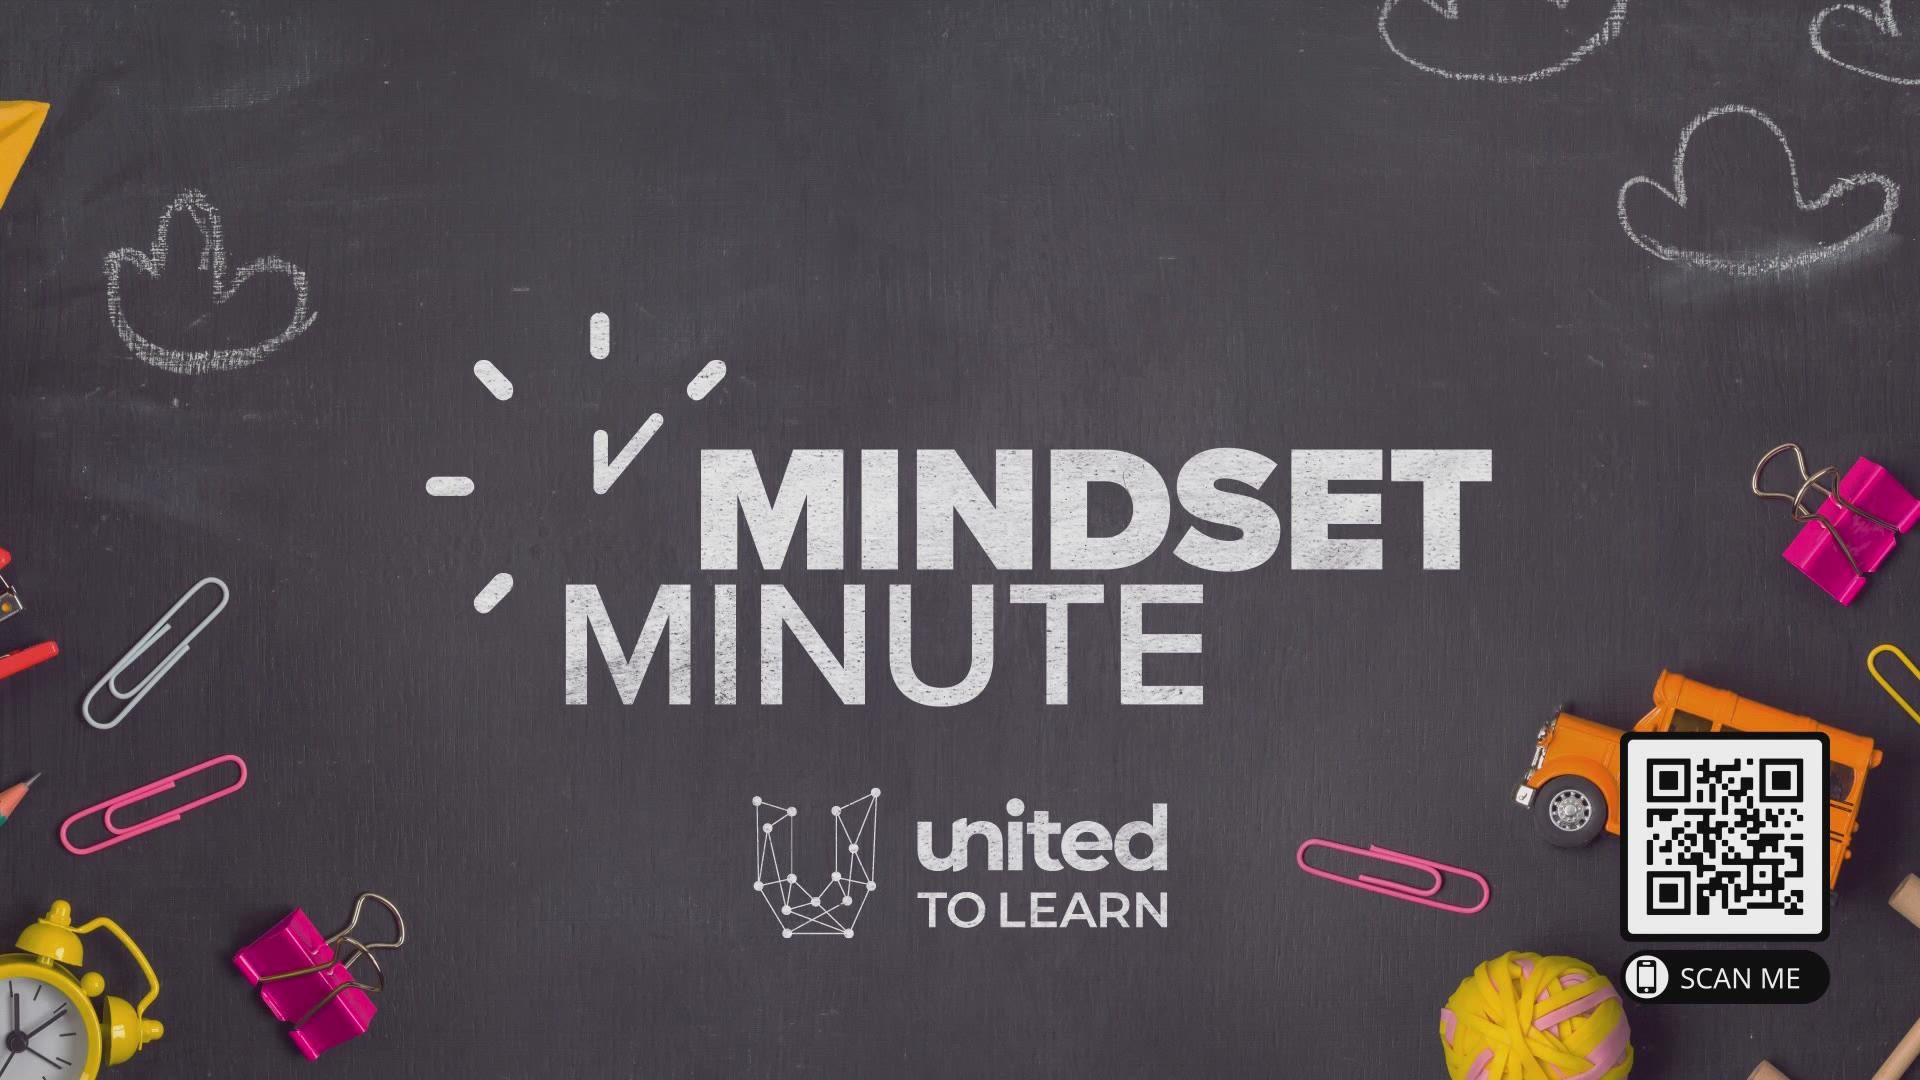 In today's Mindset Minute, we delve into how collaboration and working with others is key for your student's development.